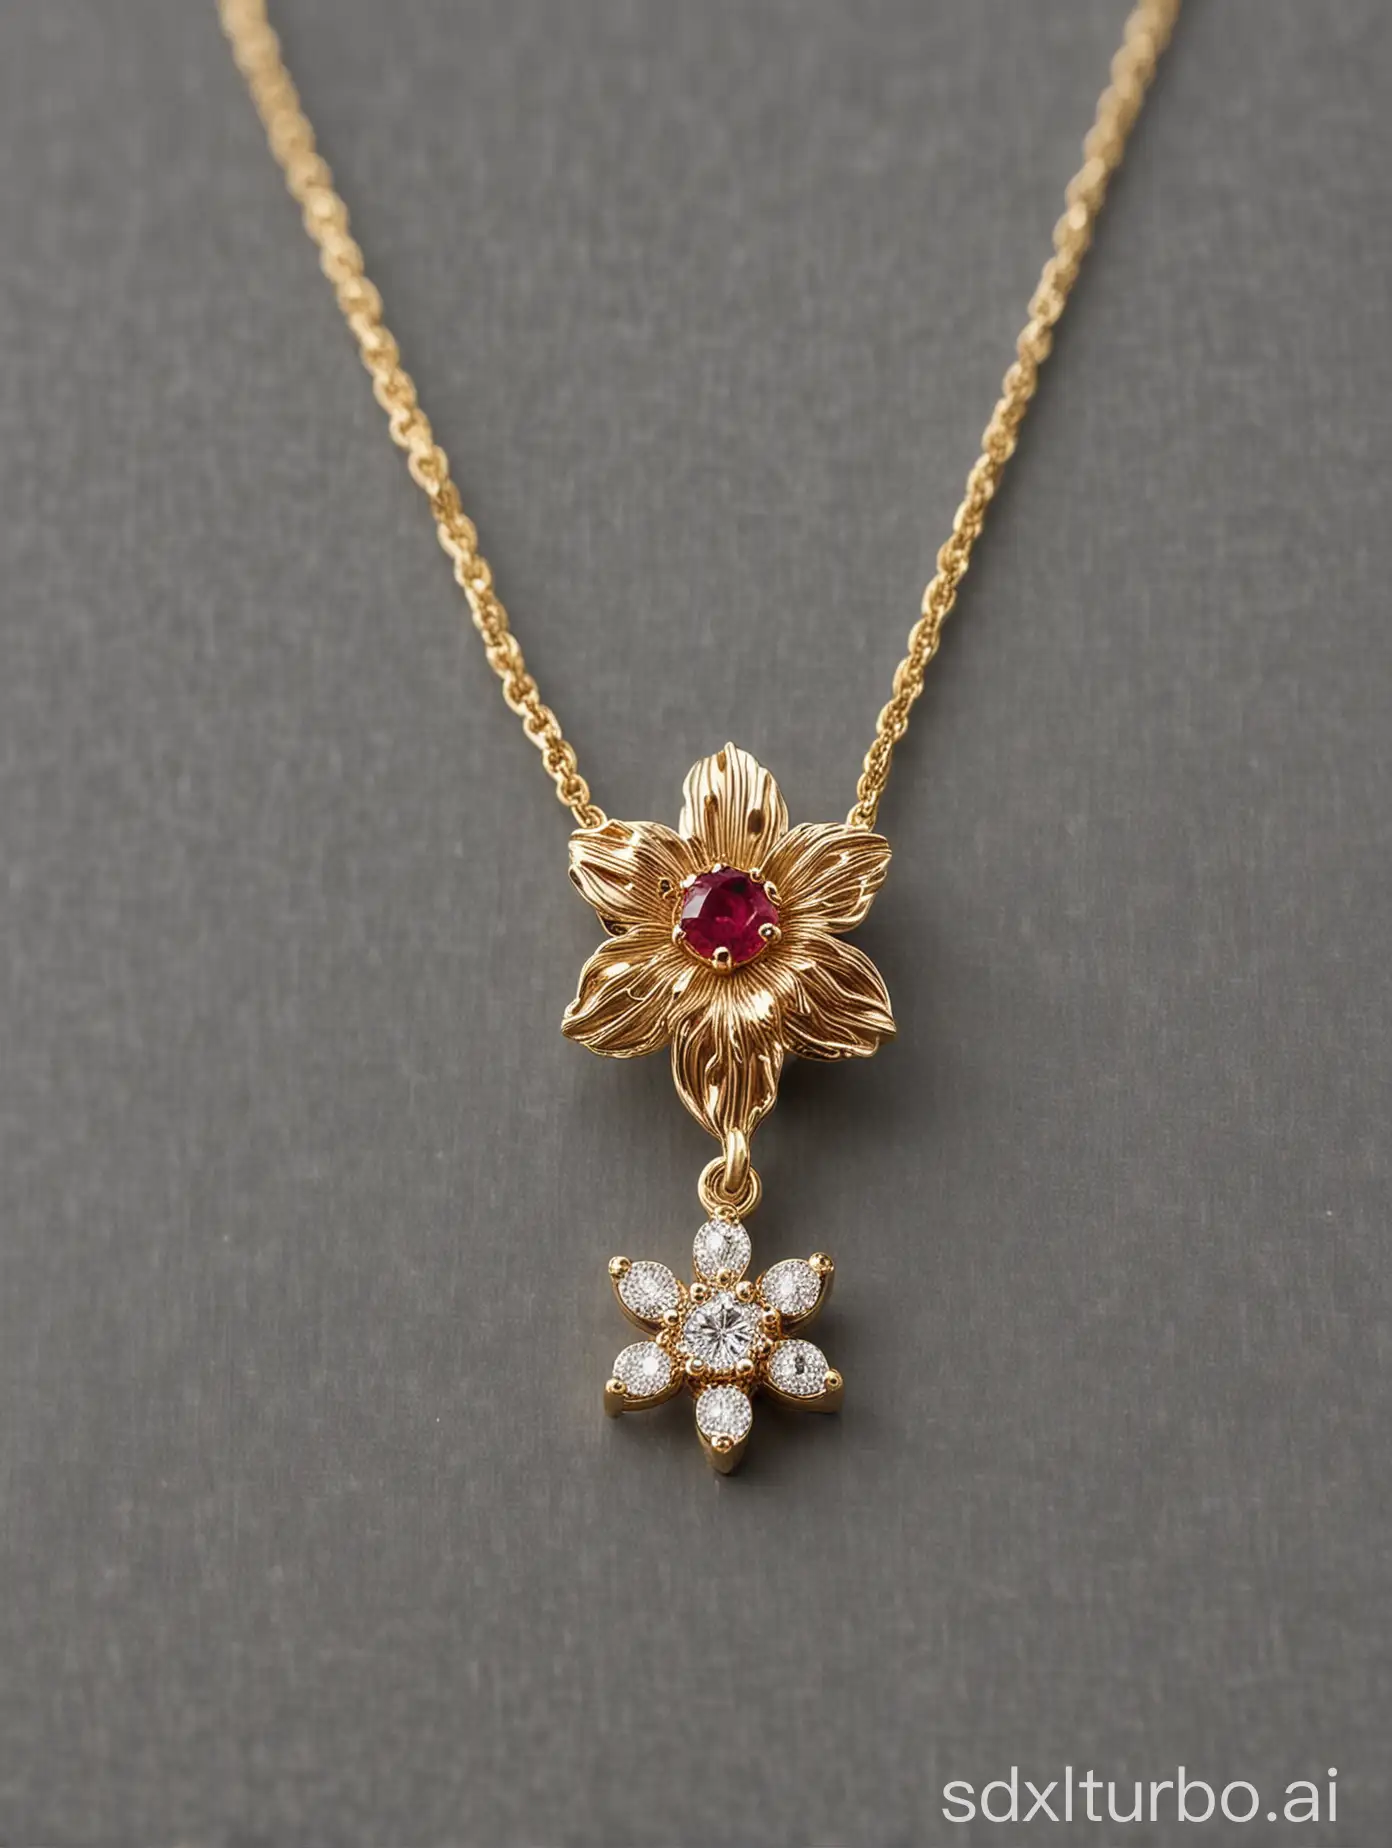 A close-up of a beautiful gold necklace. The necklace is made of a delicate gold chain with a small diamond pendant. The pendant is shaped like a flower and has a small ruby in the center.